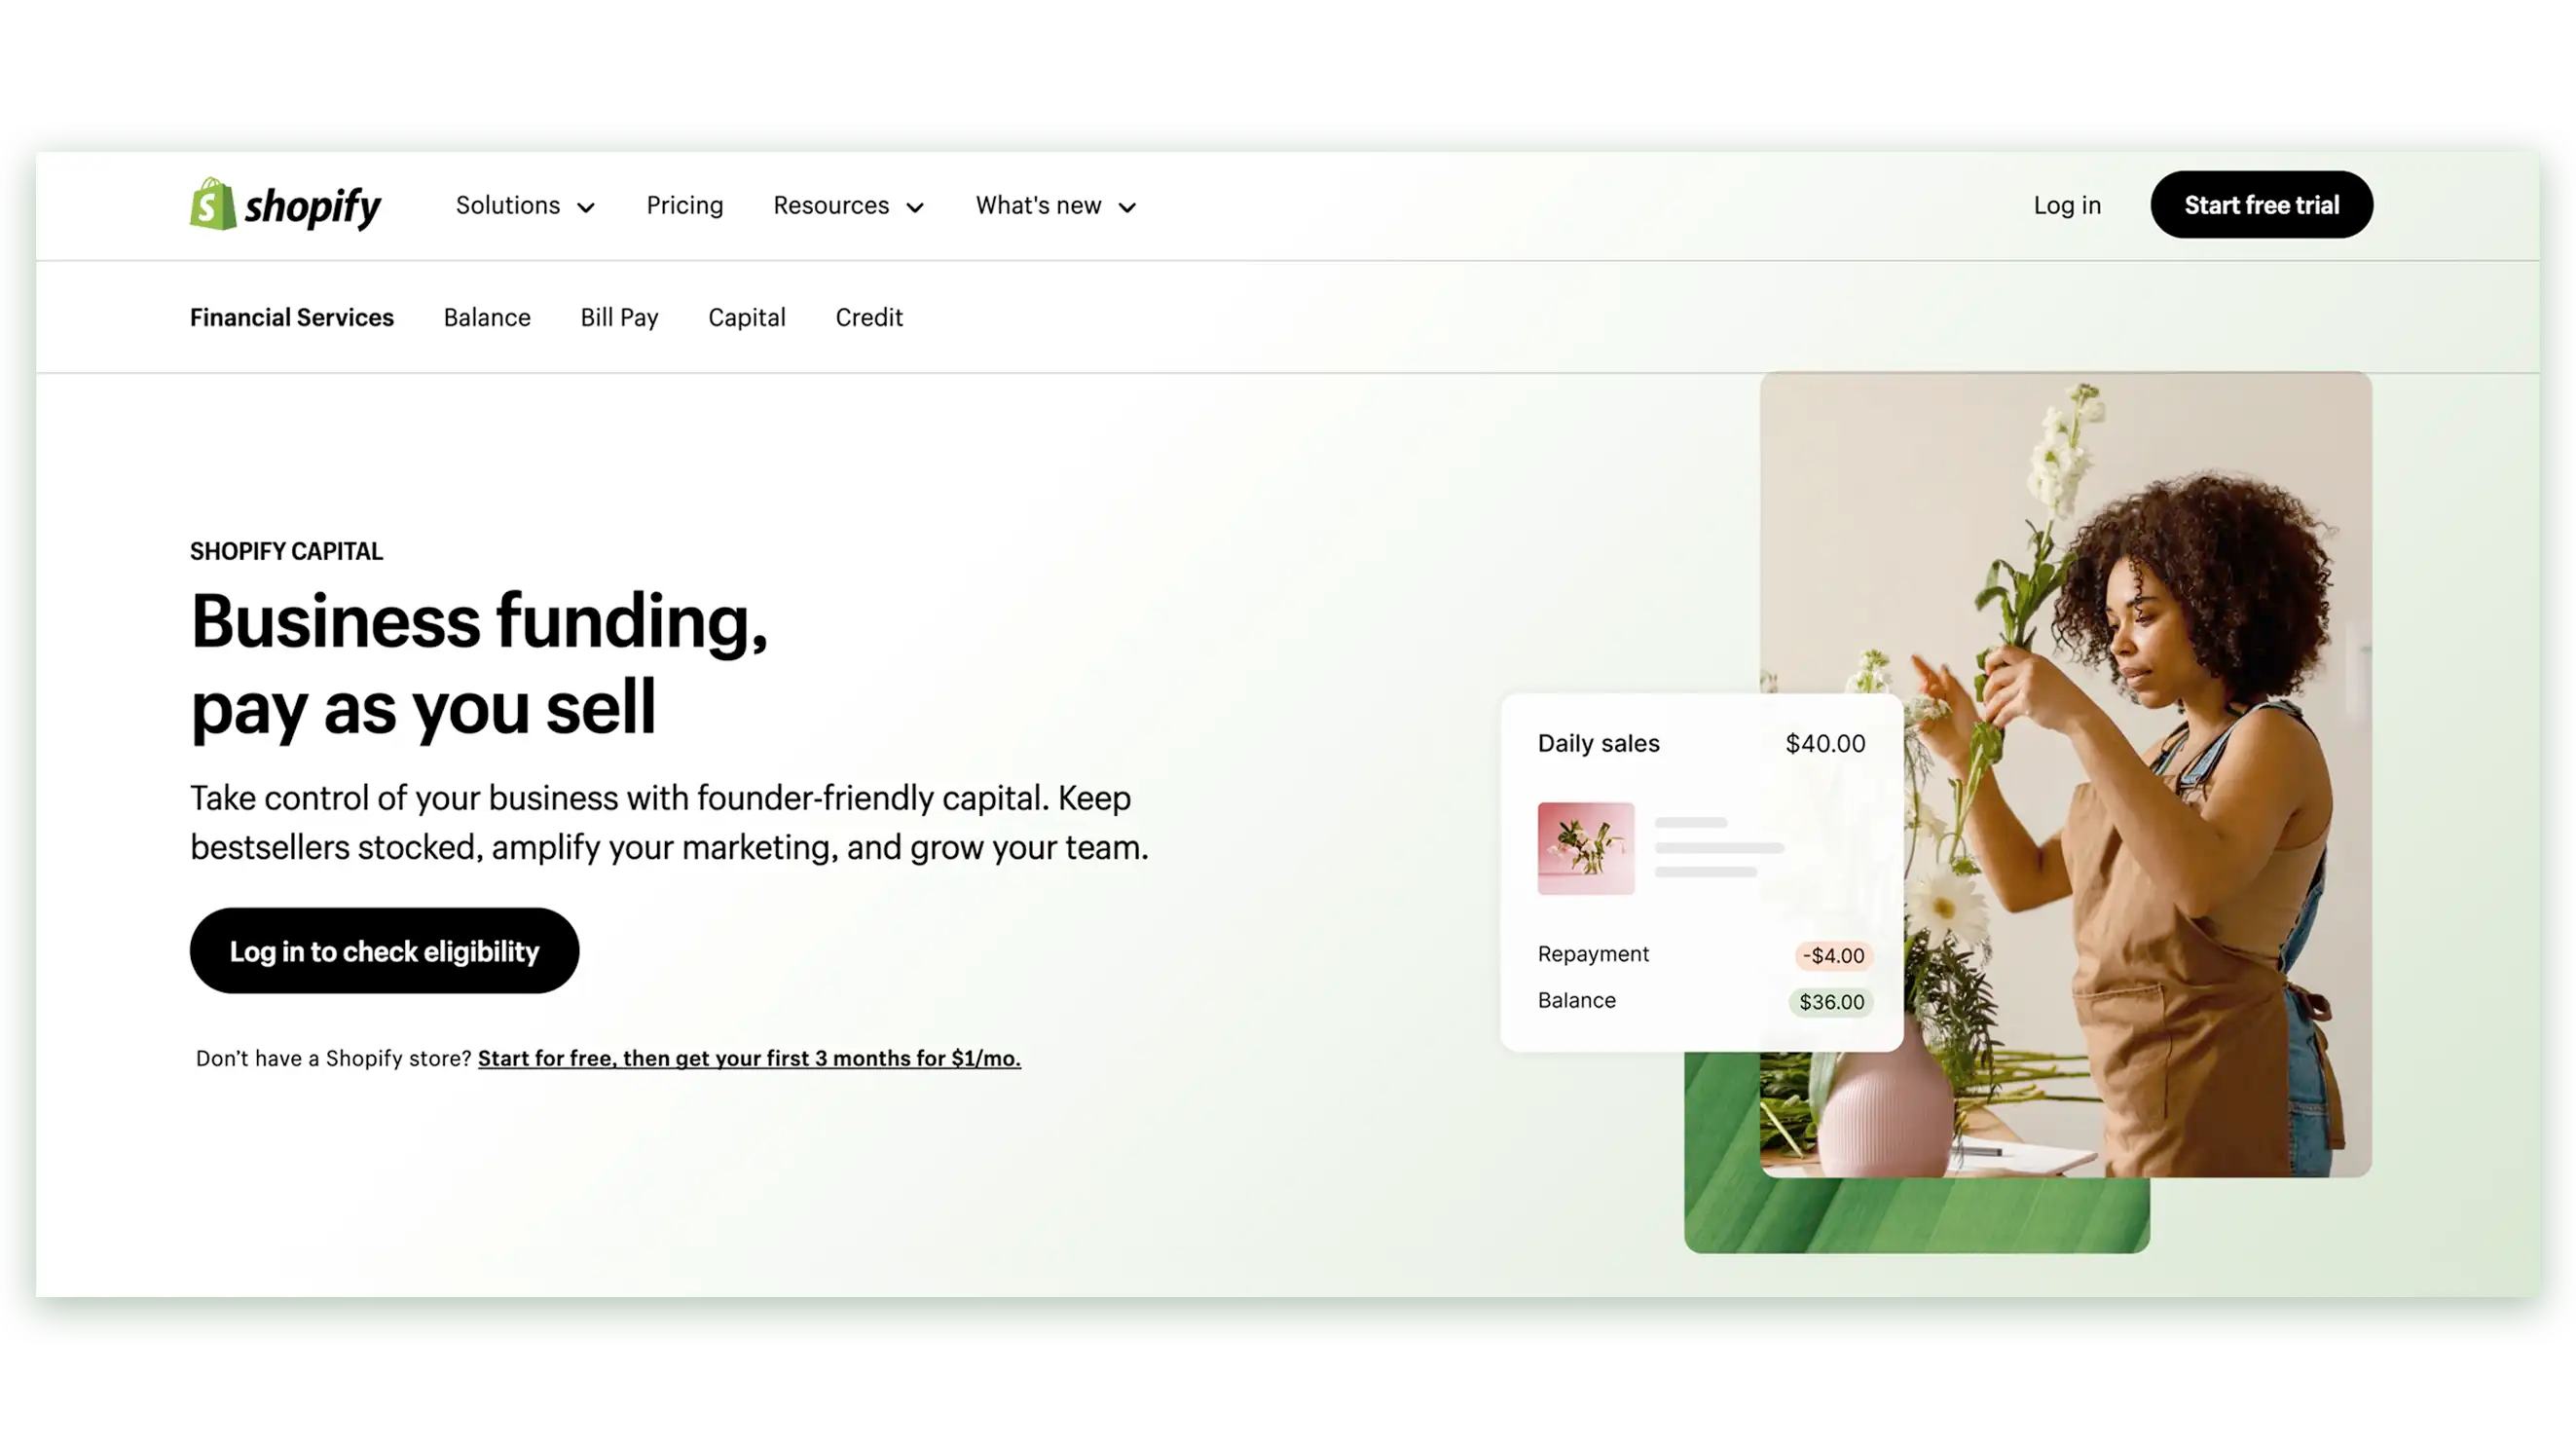 The Shopify Capital Homepage